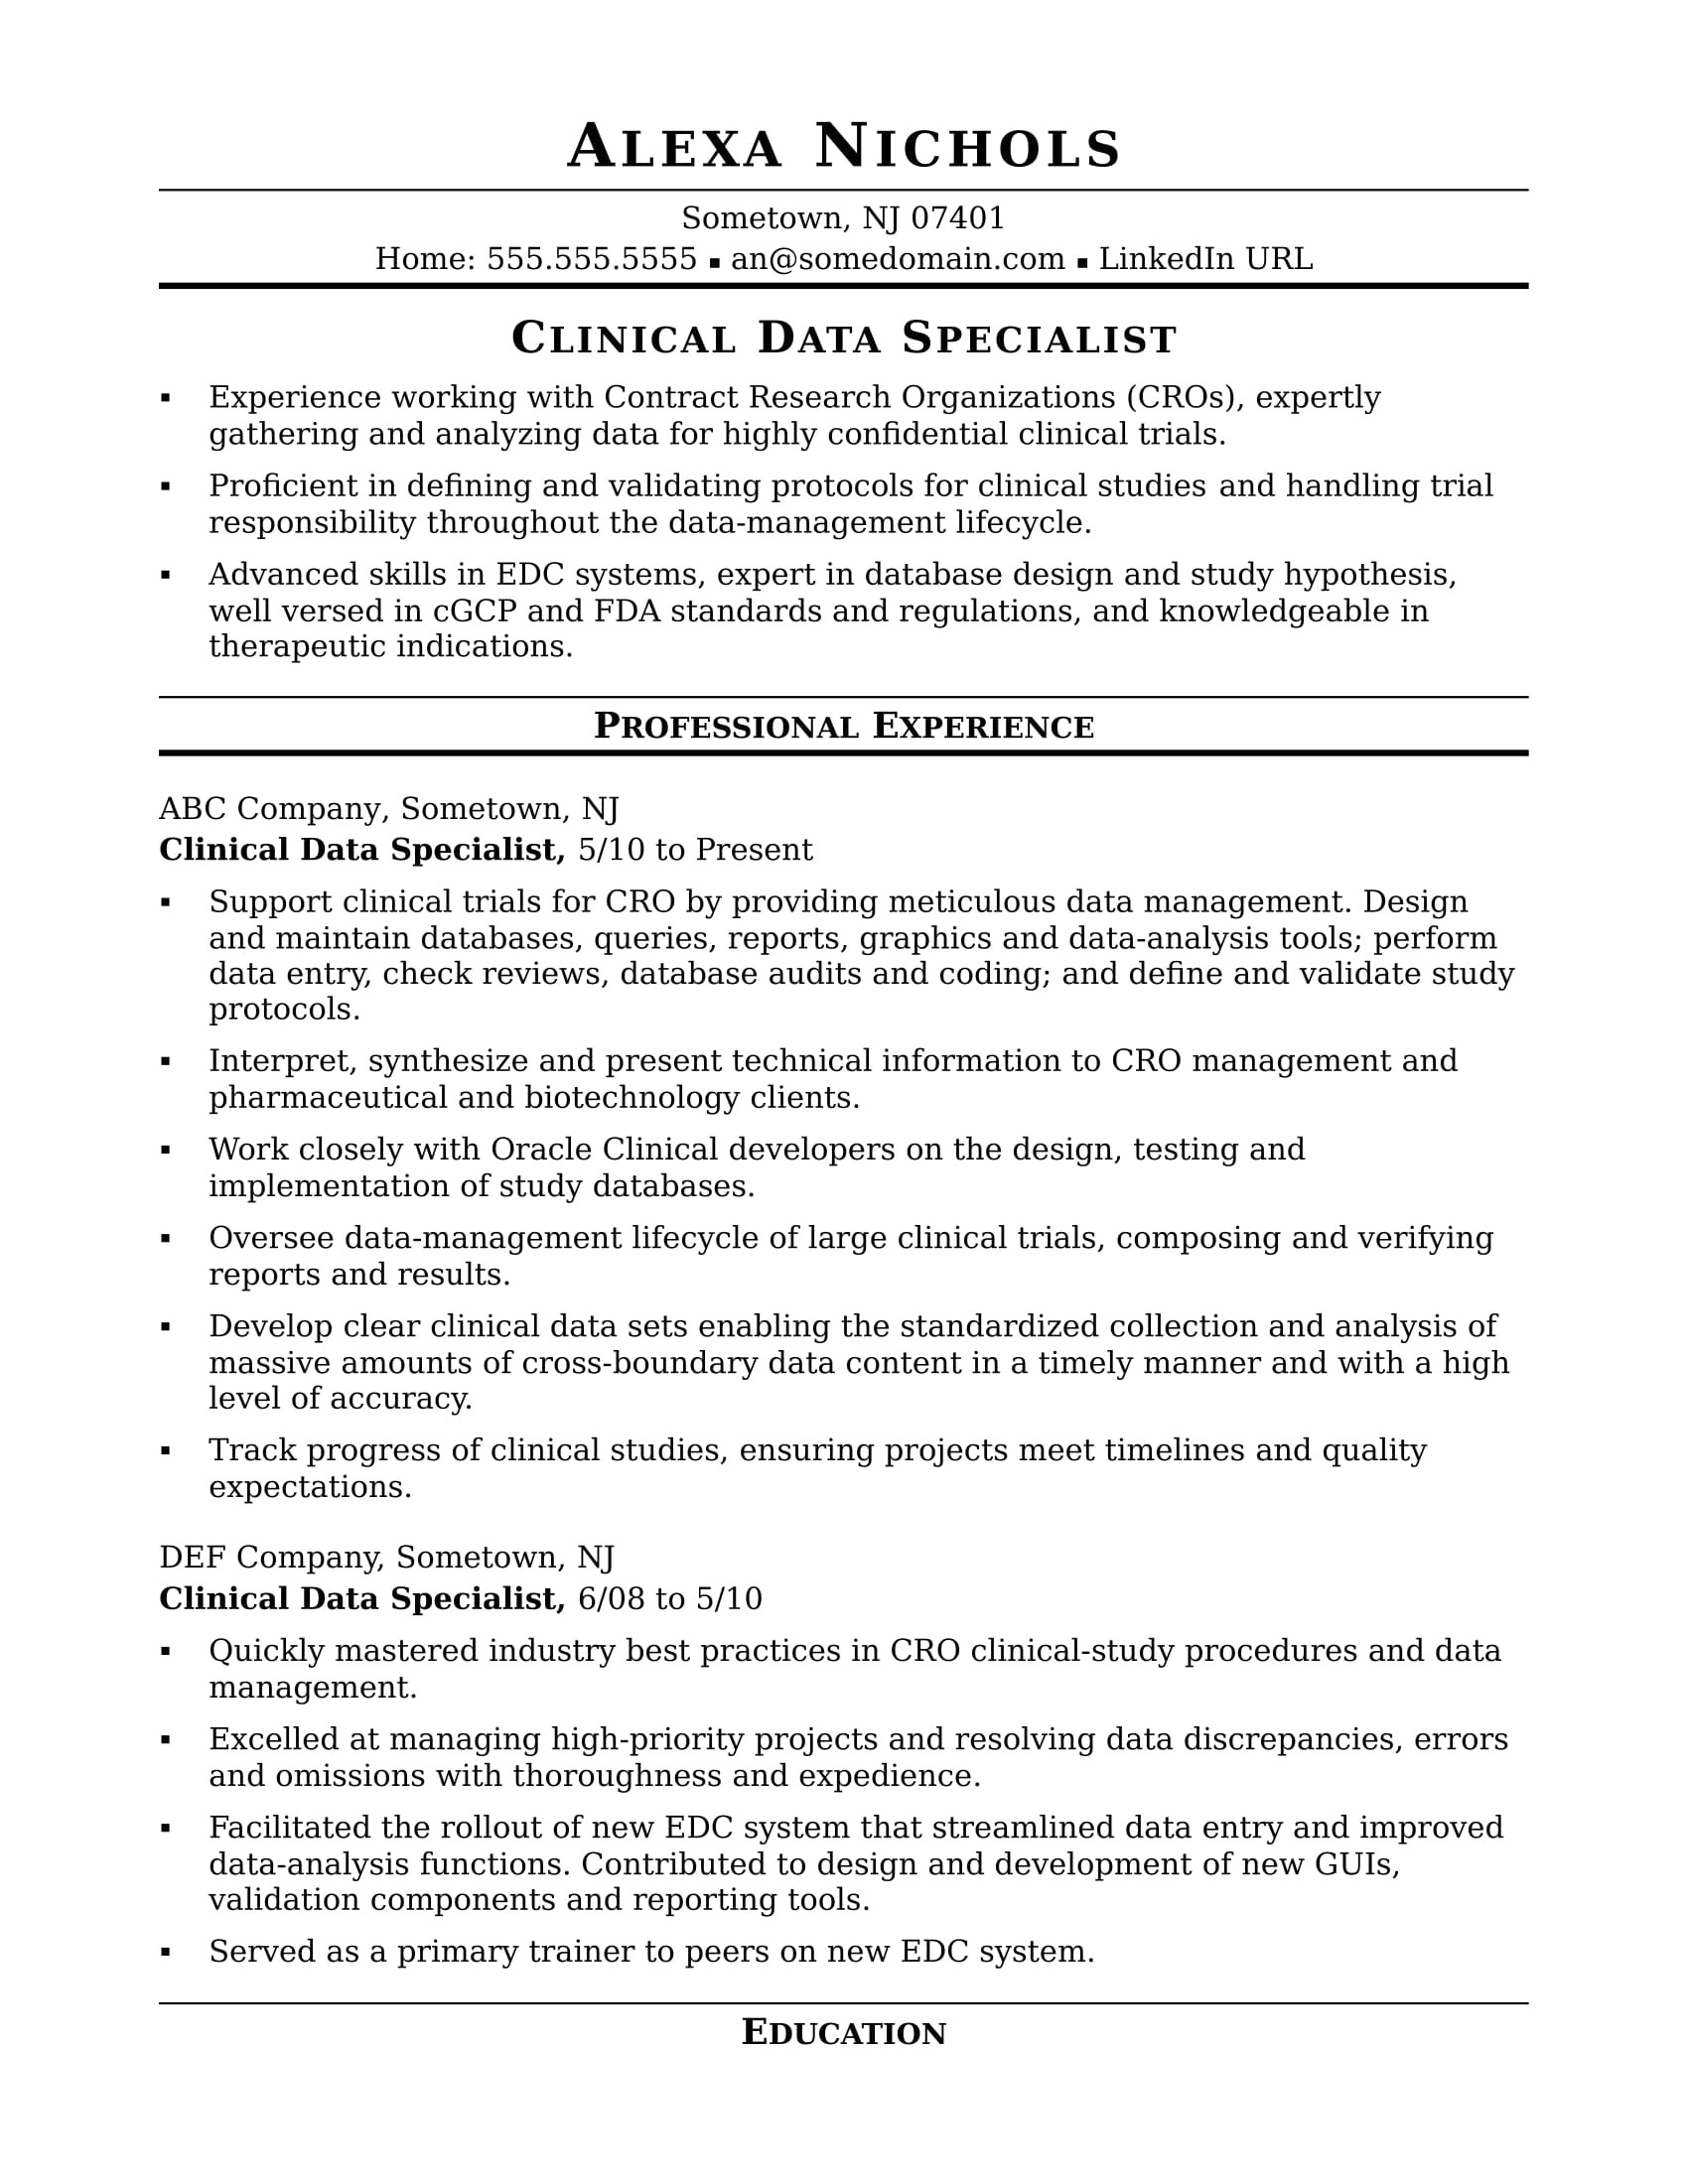 sample resume clinical data specialist